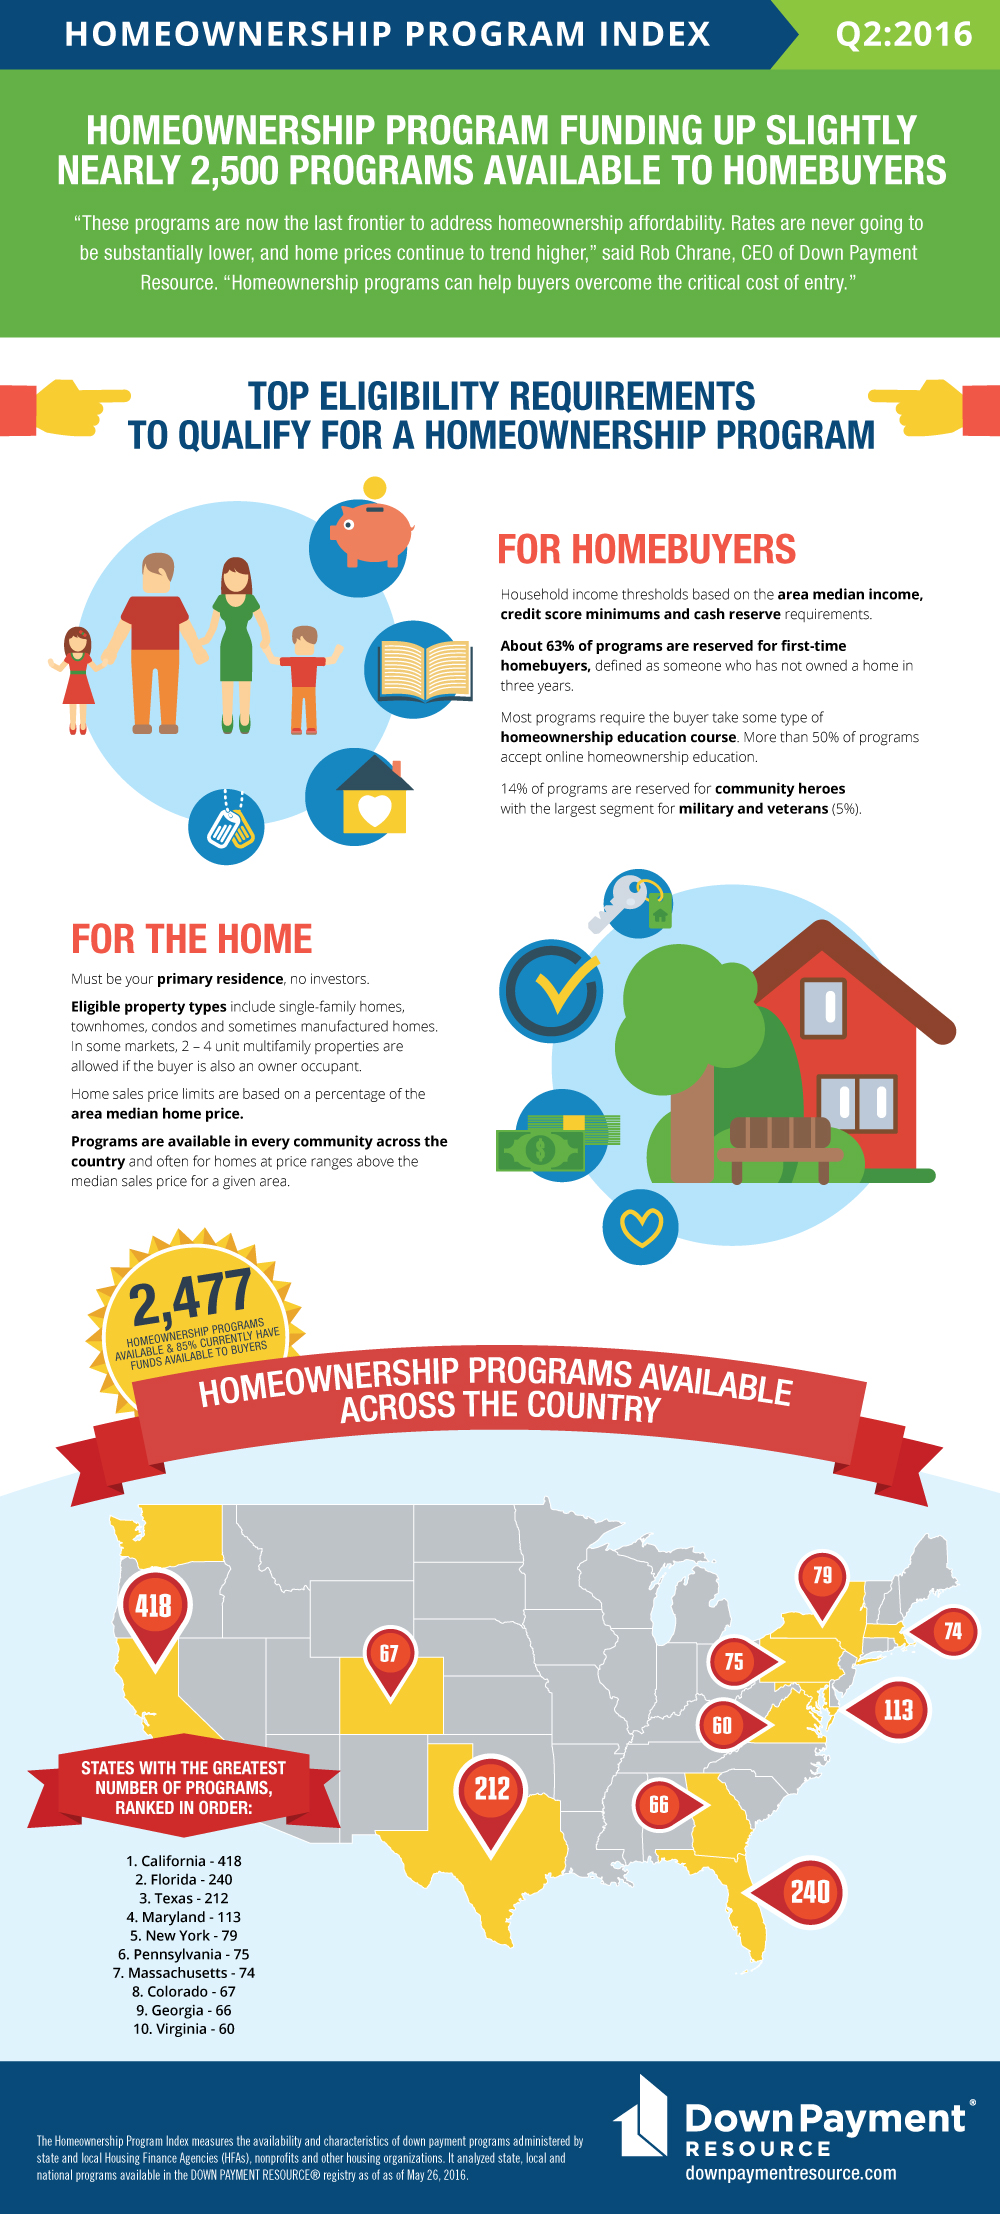 dpr-homeownership-program-index-released-nearly-2-500-programs